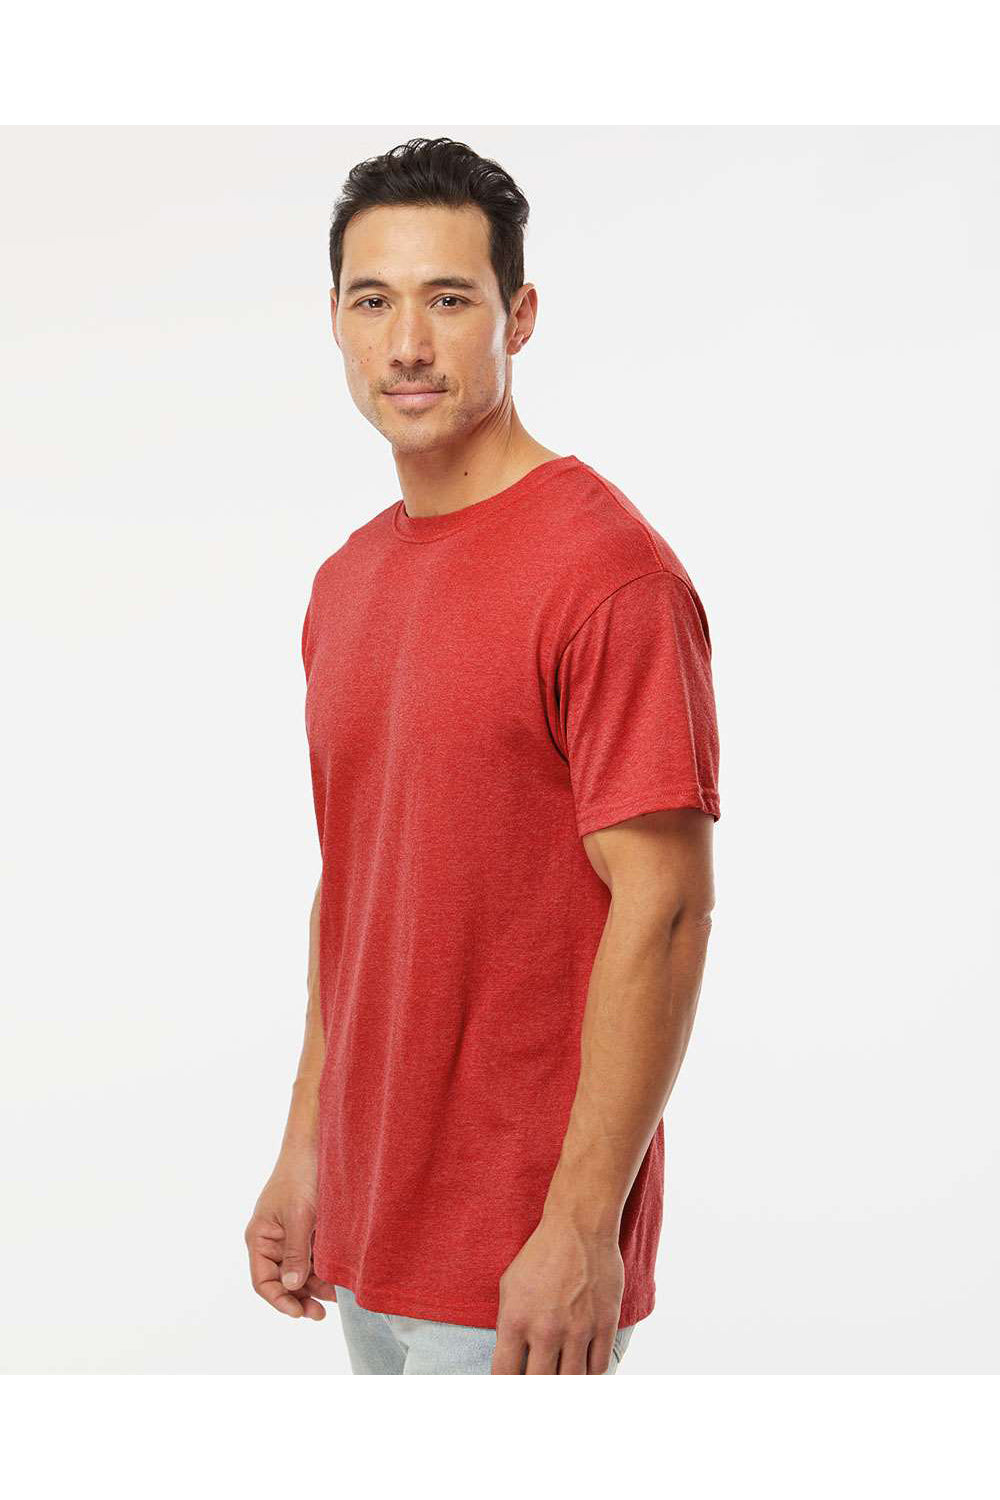 M&O 4800 Mens Gold Soft Touch Short Sleeve Crewneck T-Shirt Heather Red Model Side